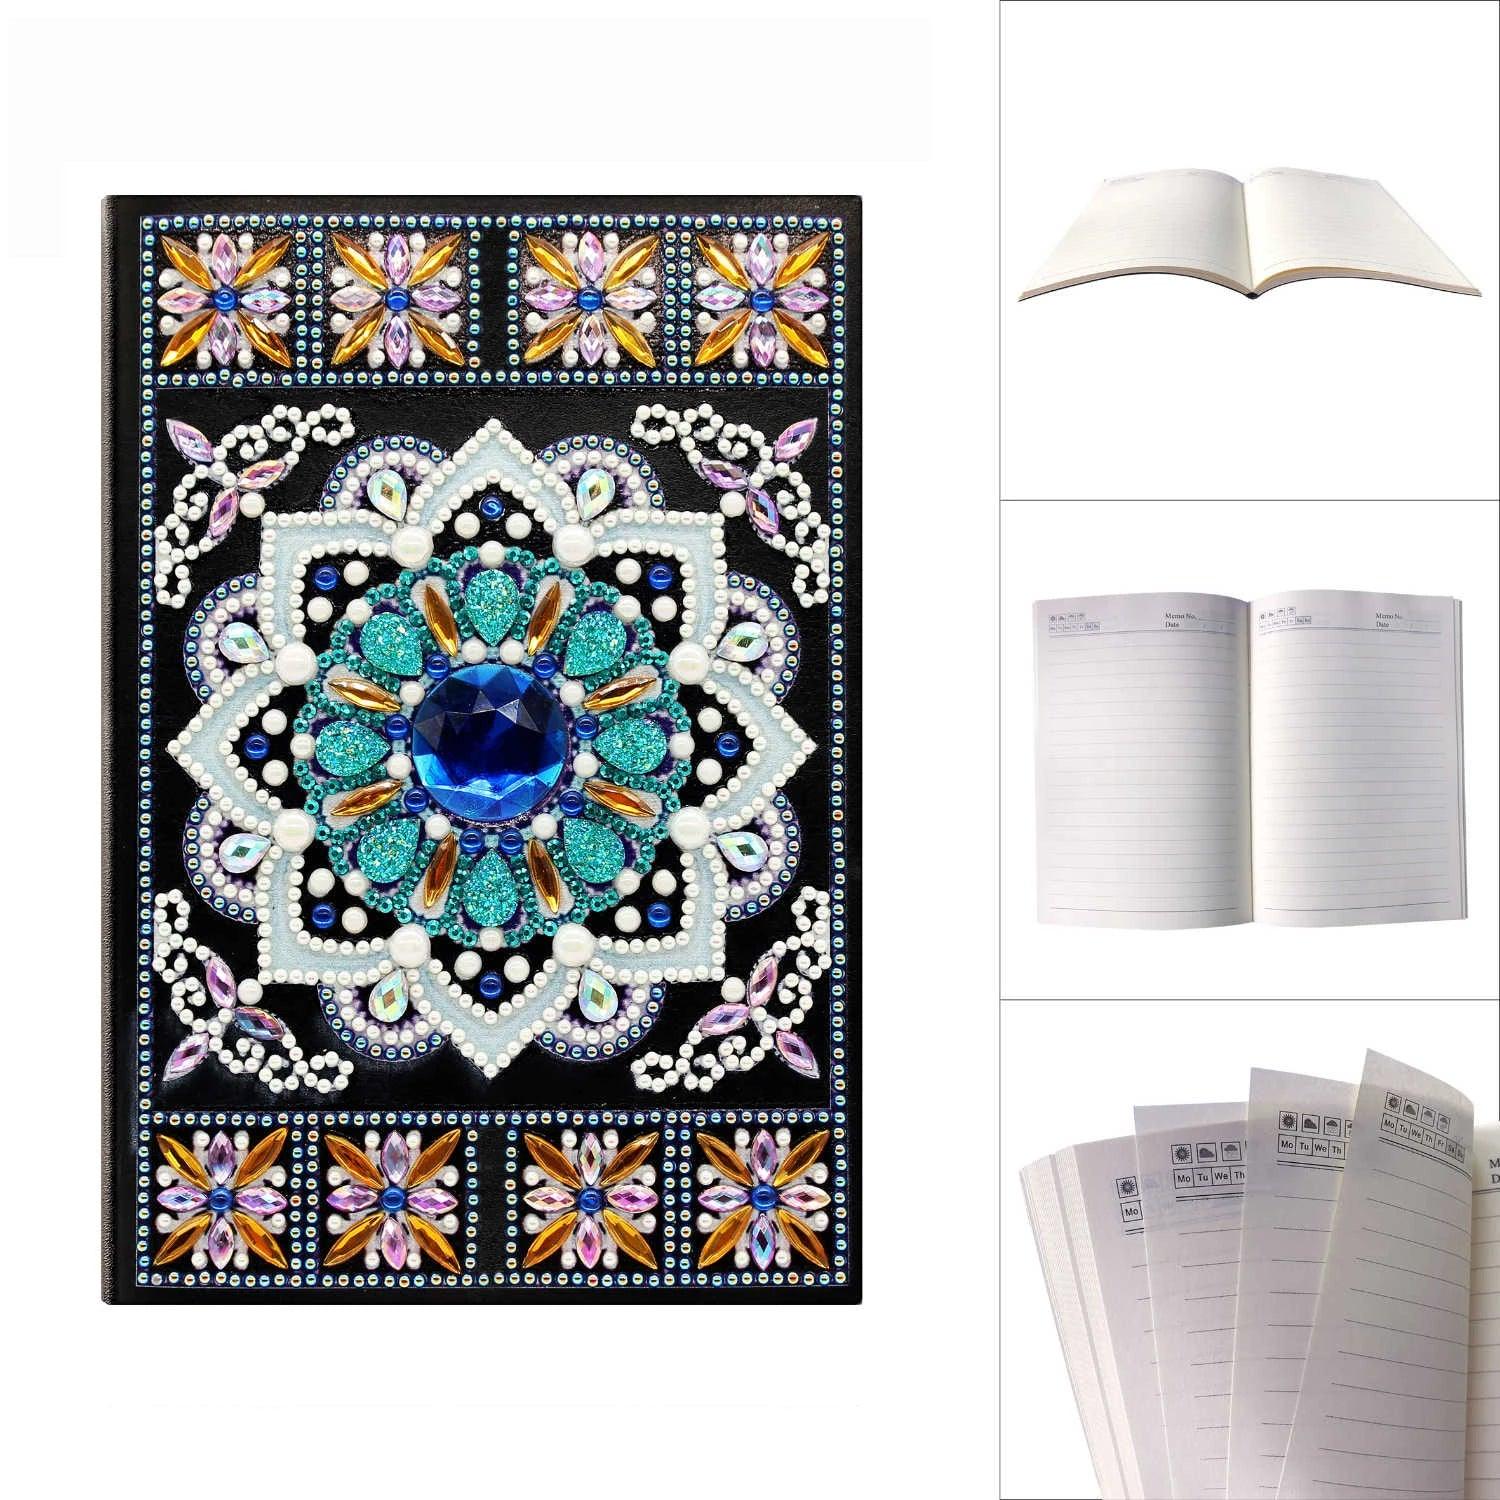 AZQSD Diamond Painting Mosaic Notebook Special Shaped Flower Mandala Patterns A5 Diary Book Embroidery Gift DIY - YOURISHOP.COM